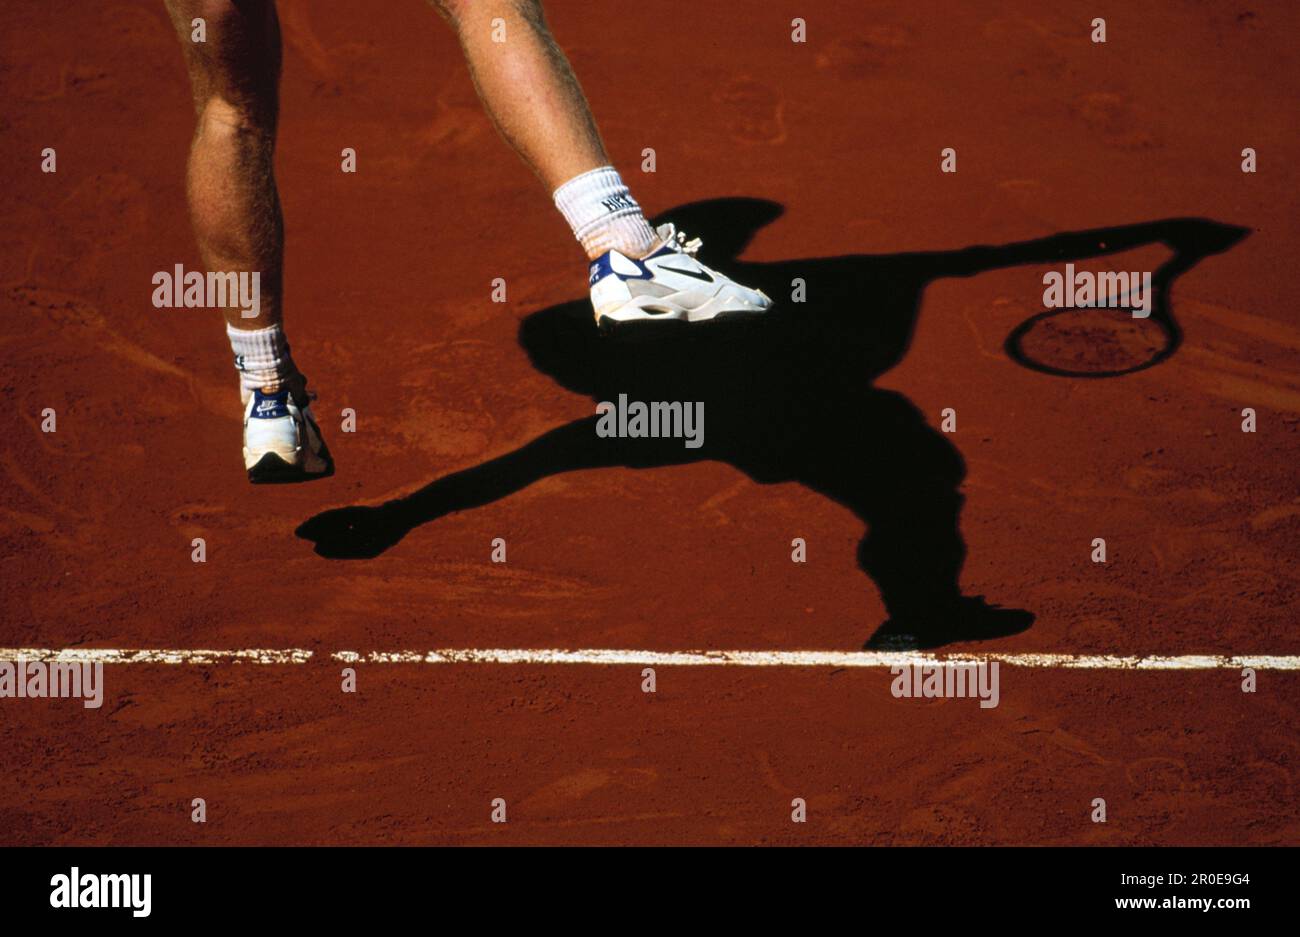 Tennis player at serve, Tennis, French Open Stock Photo